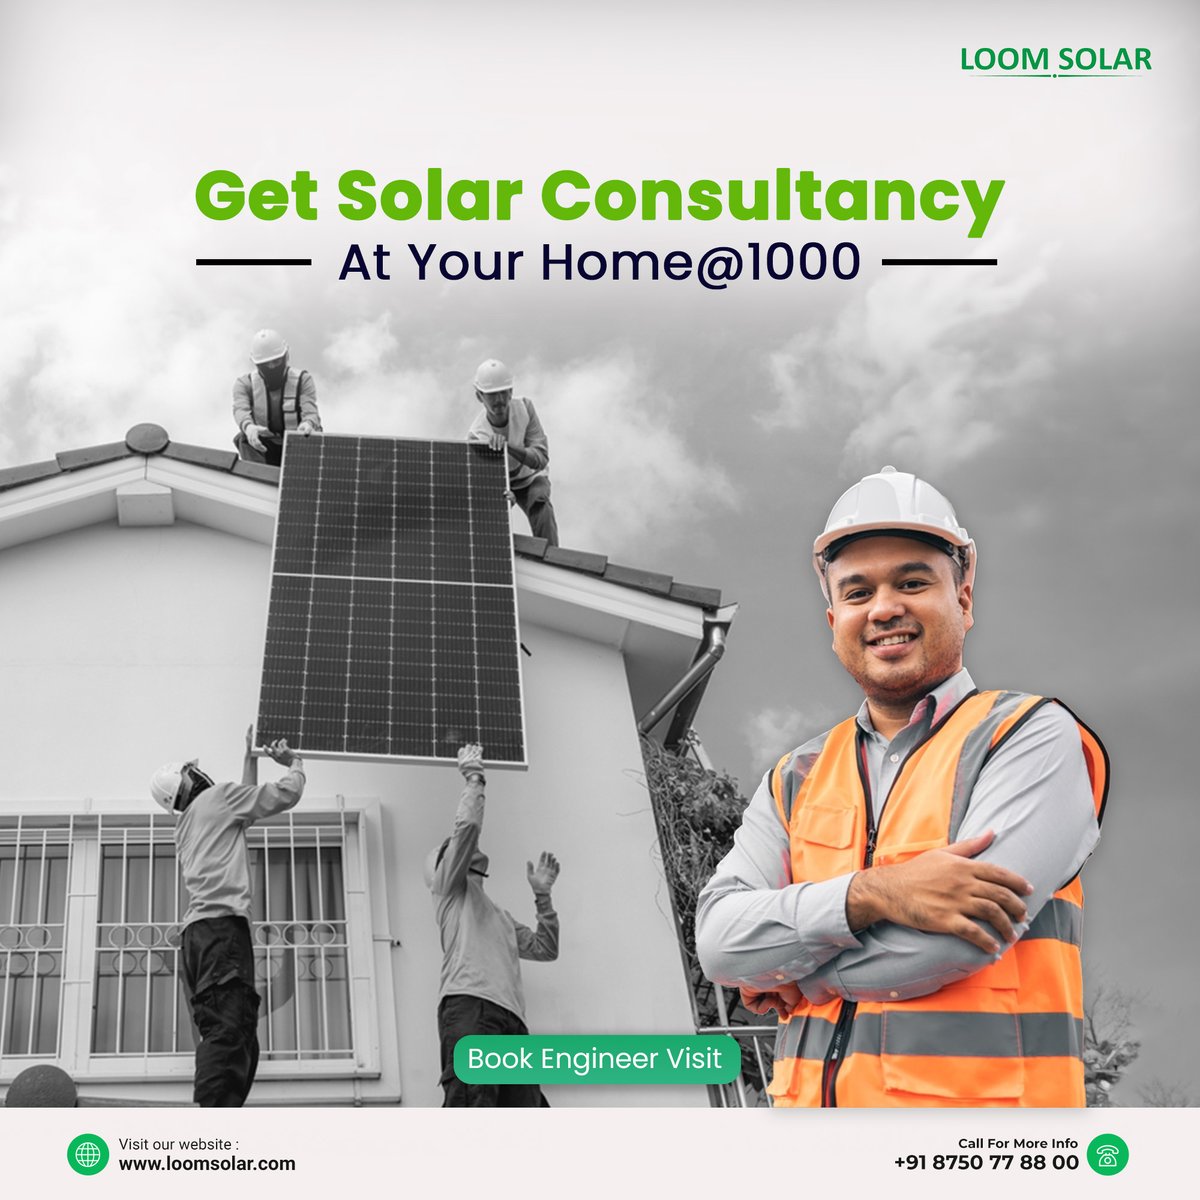 Discover Loom Solar's Engineer Visit Service! From initial assessments to customized solar plans, we provide tailored solutions to match your unique requirements. Visit loomsolar.com/products/engin… #EngineerVisit #Sustainability #RenewableEnergy #अपना_घर_अपनी_बिजली